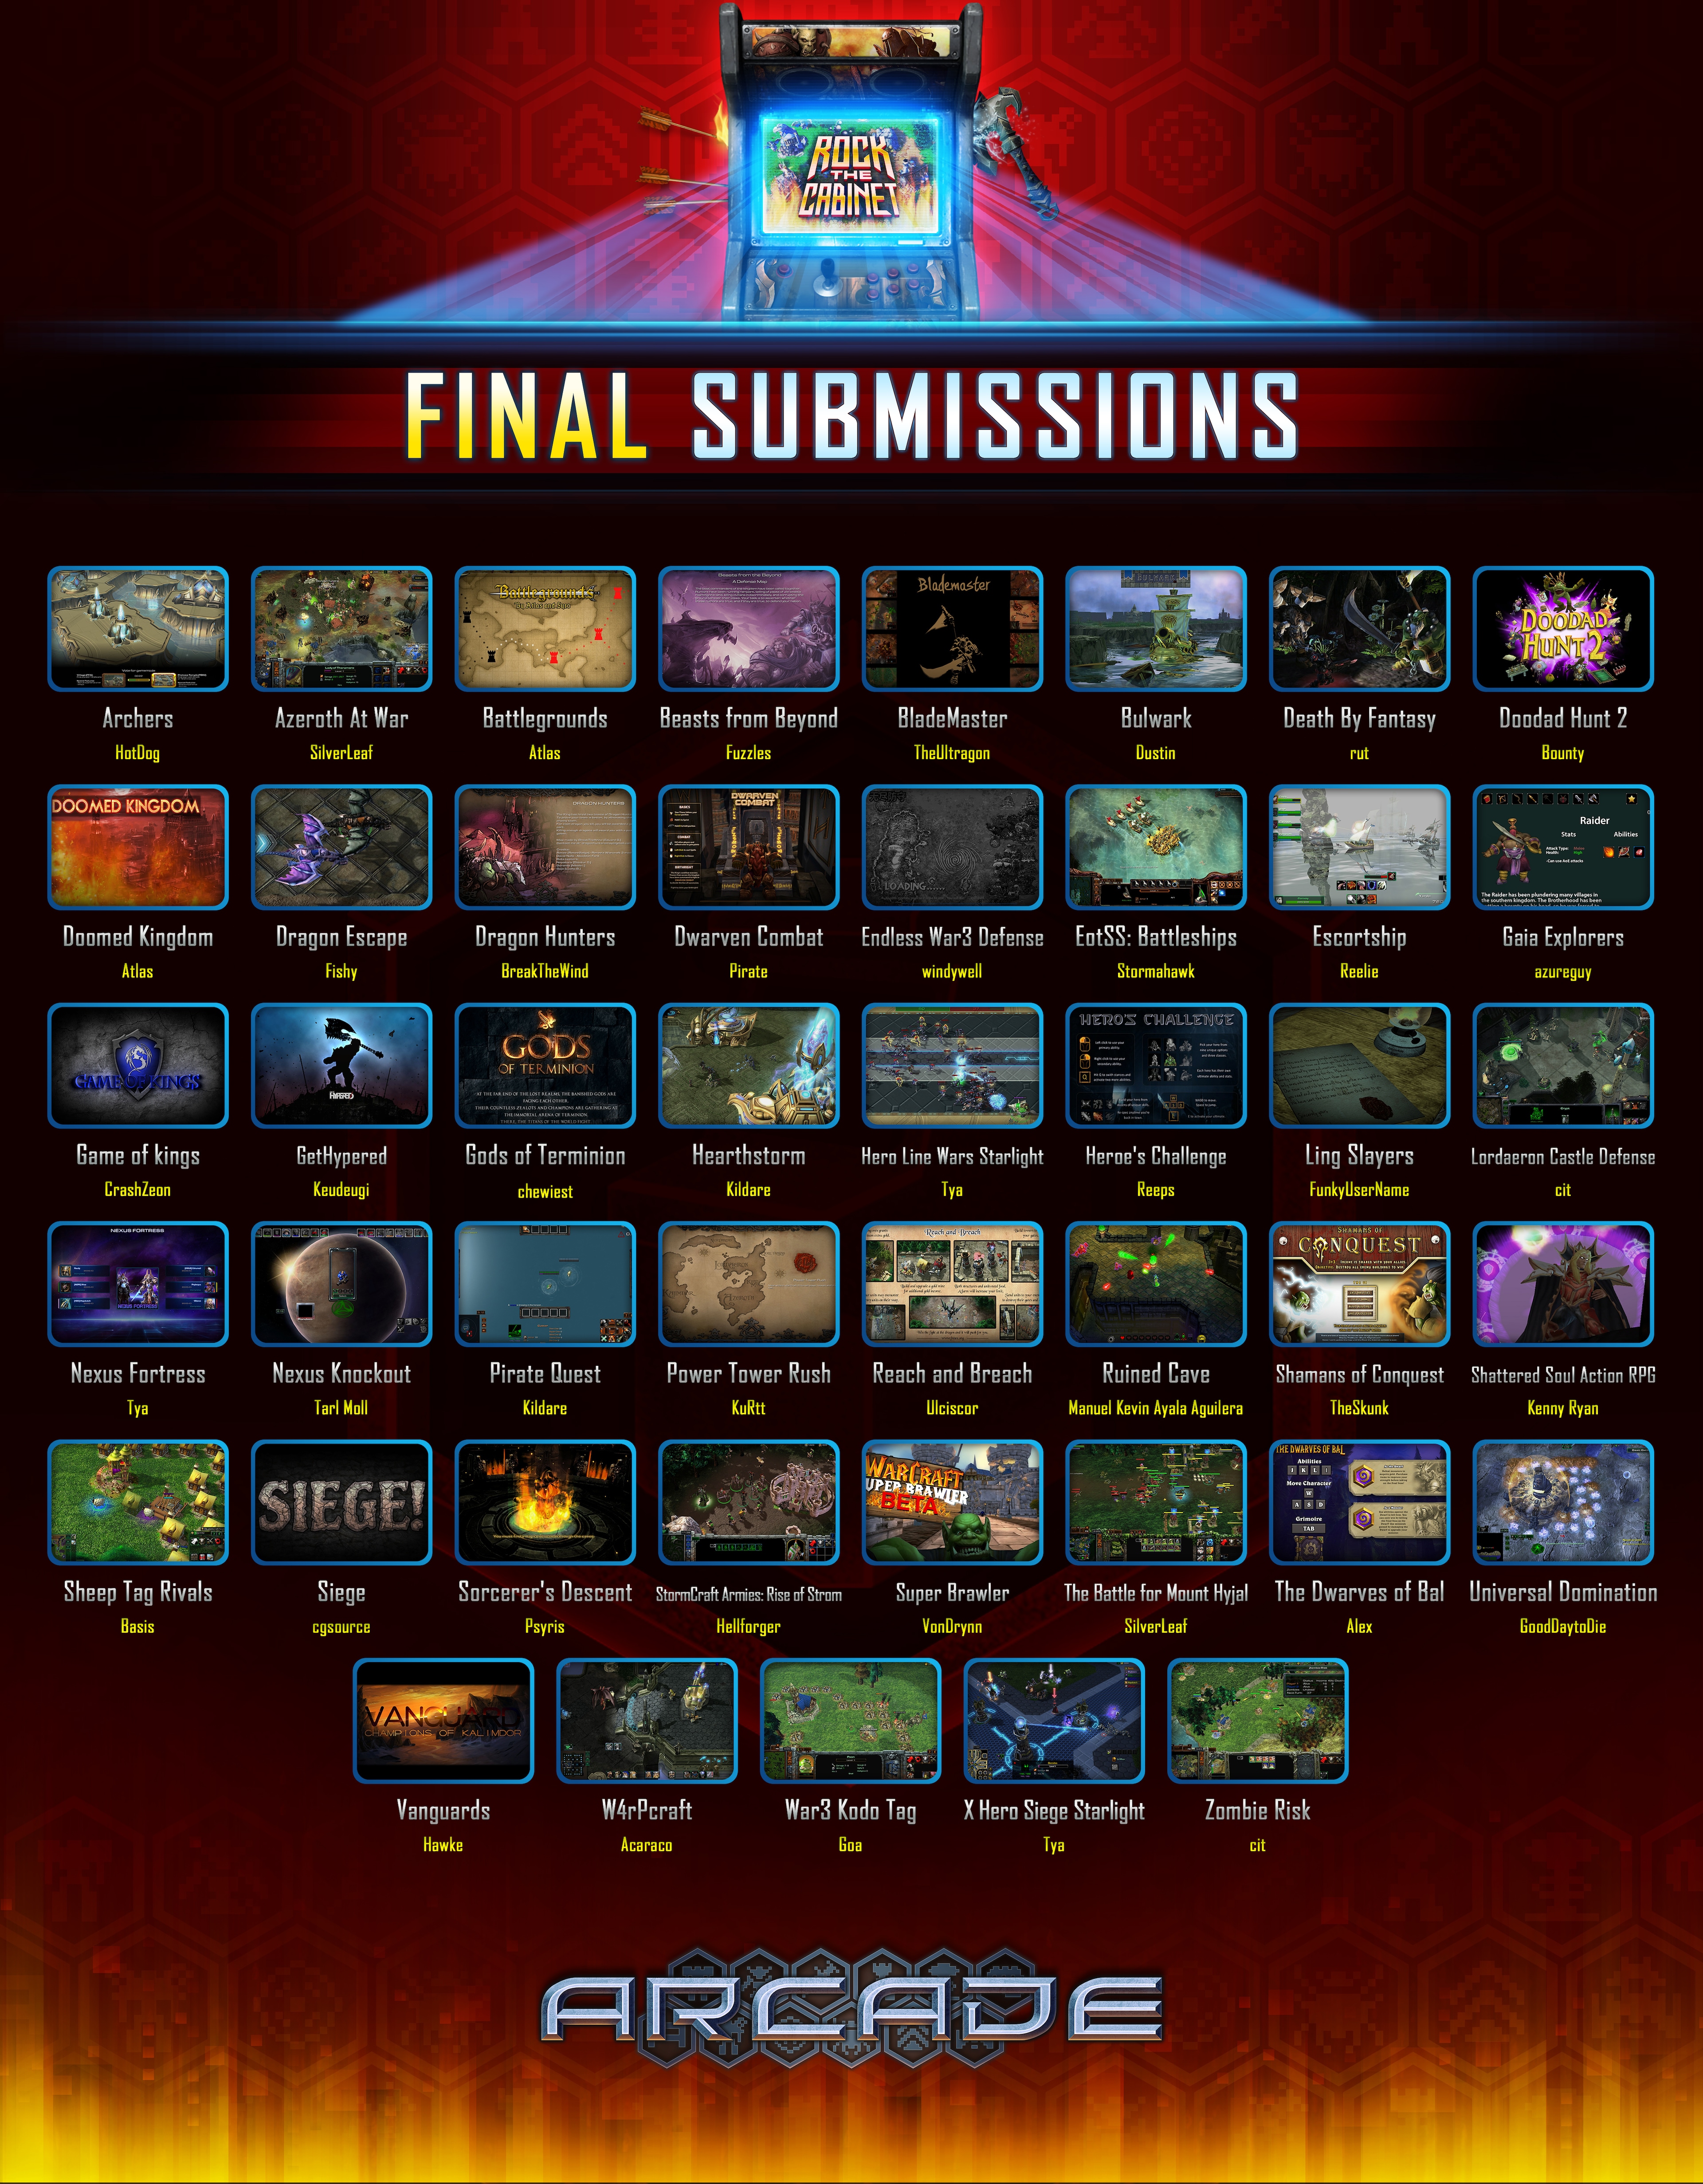 Final submissions